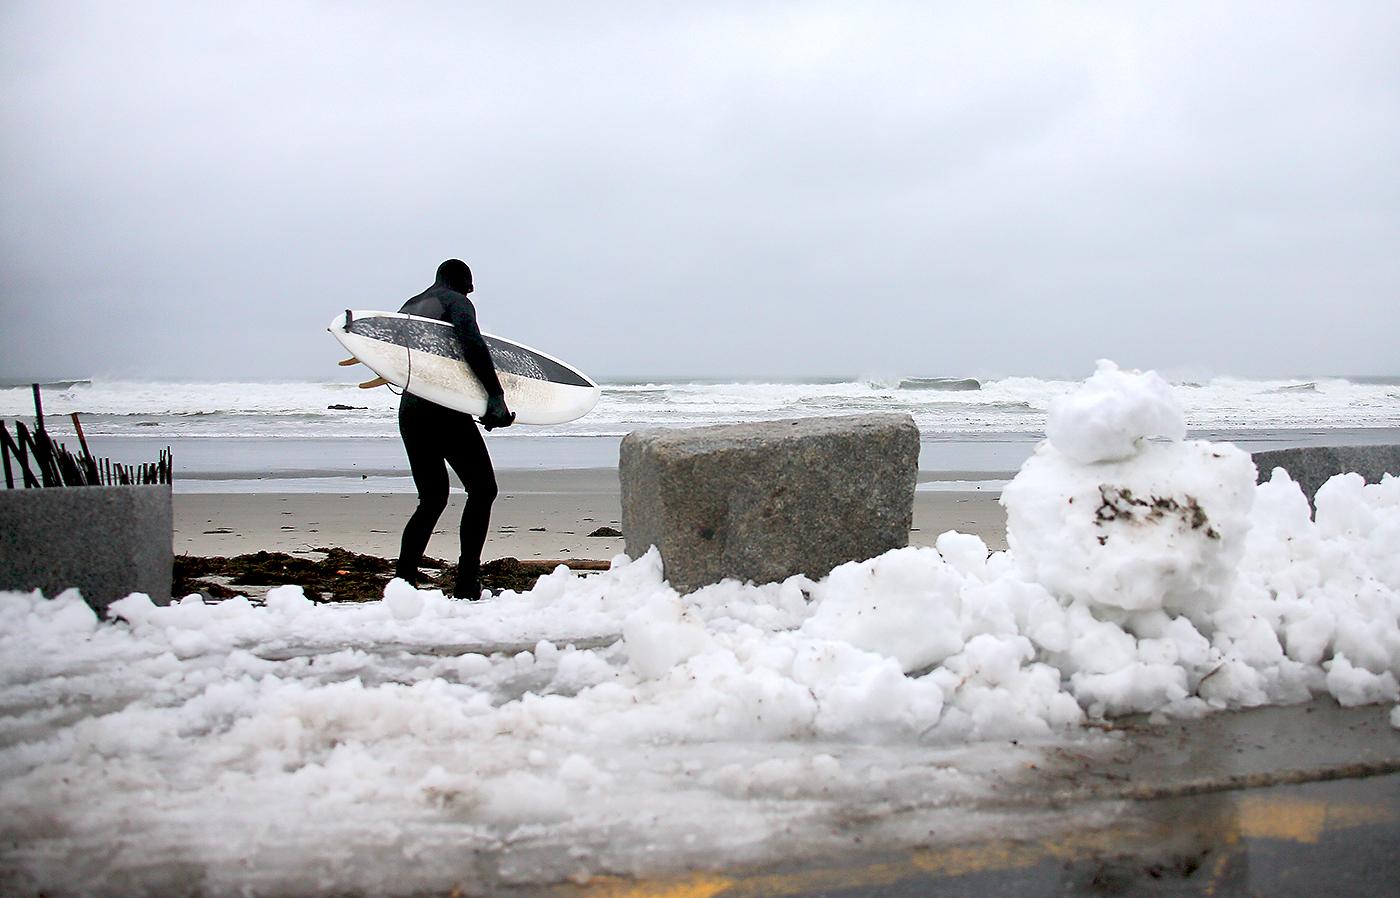                             &#x201C;Water temps on the Eastern Seaboard get as cold as anywhere we go,&#x201D; says one surfer